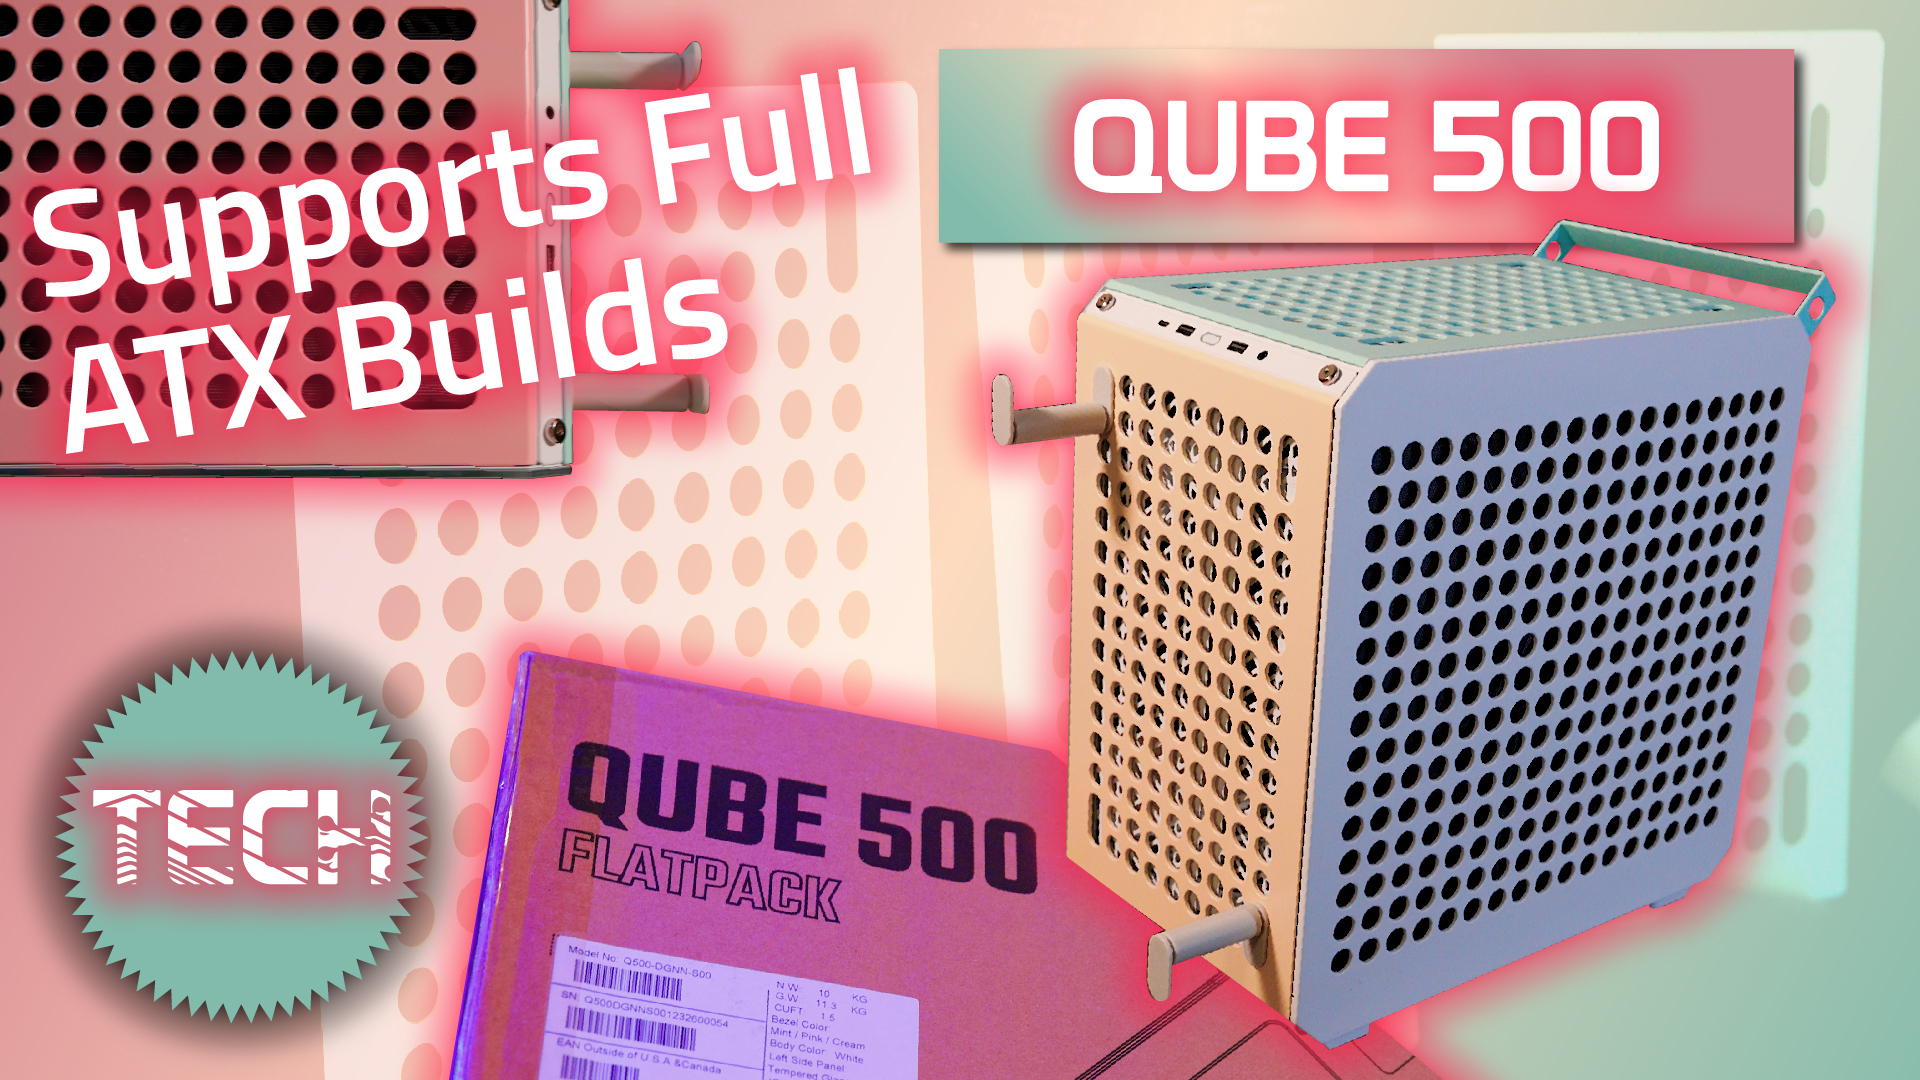 Cooler Master QUBE 500 Review – A New Way To Build PC’s